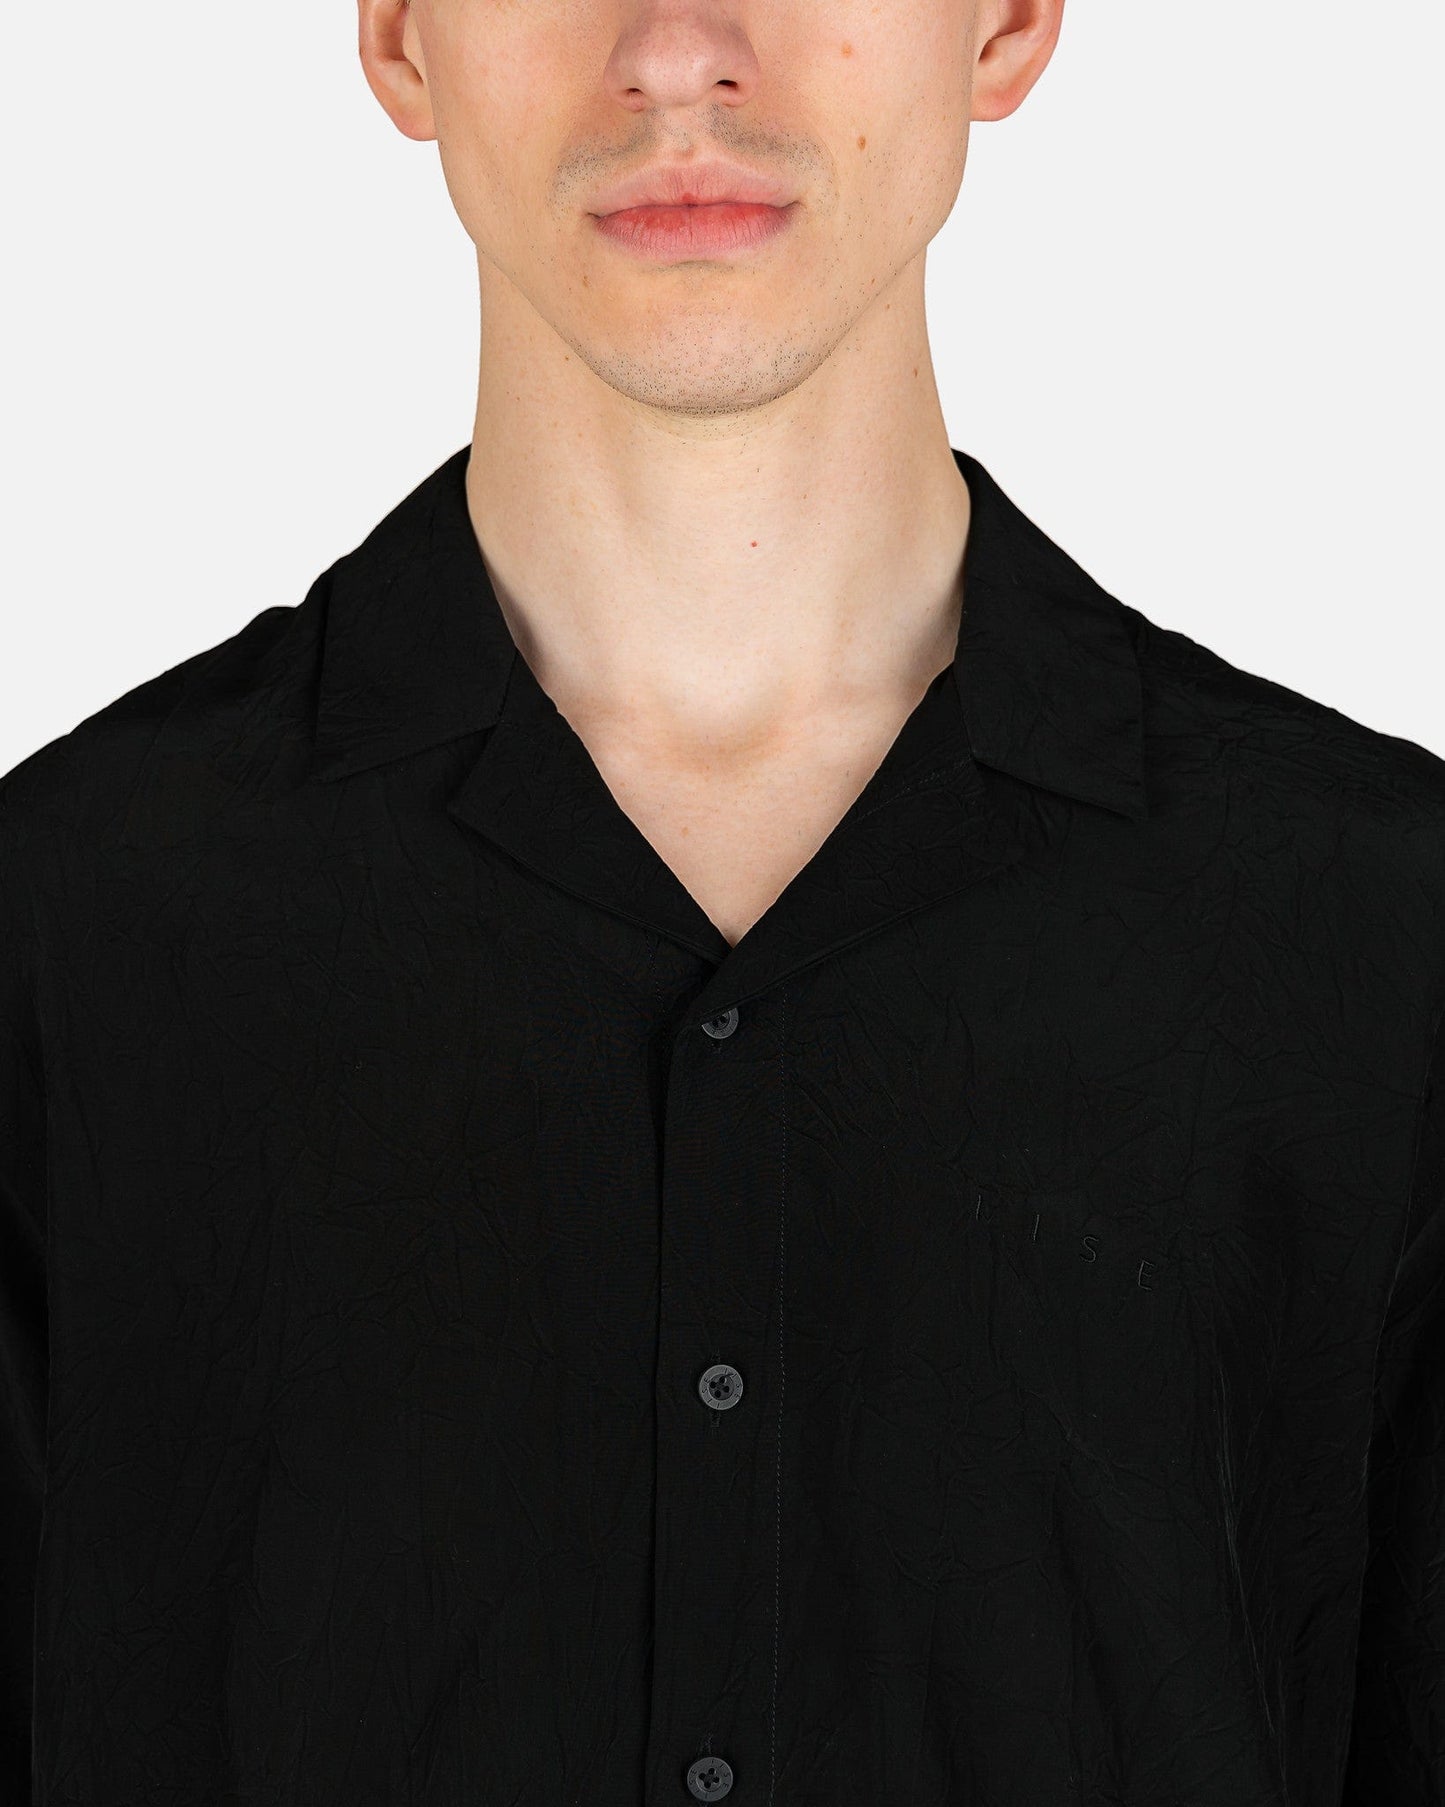 IISE Men's Shirts Creased Camp Shirt in Black